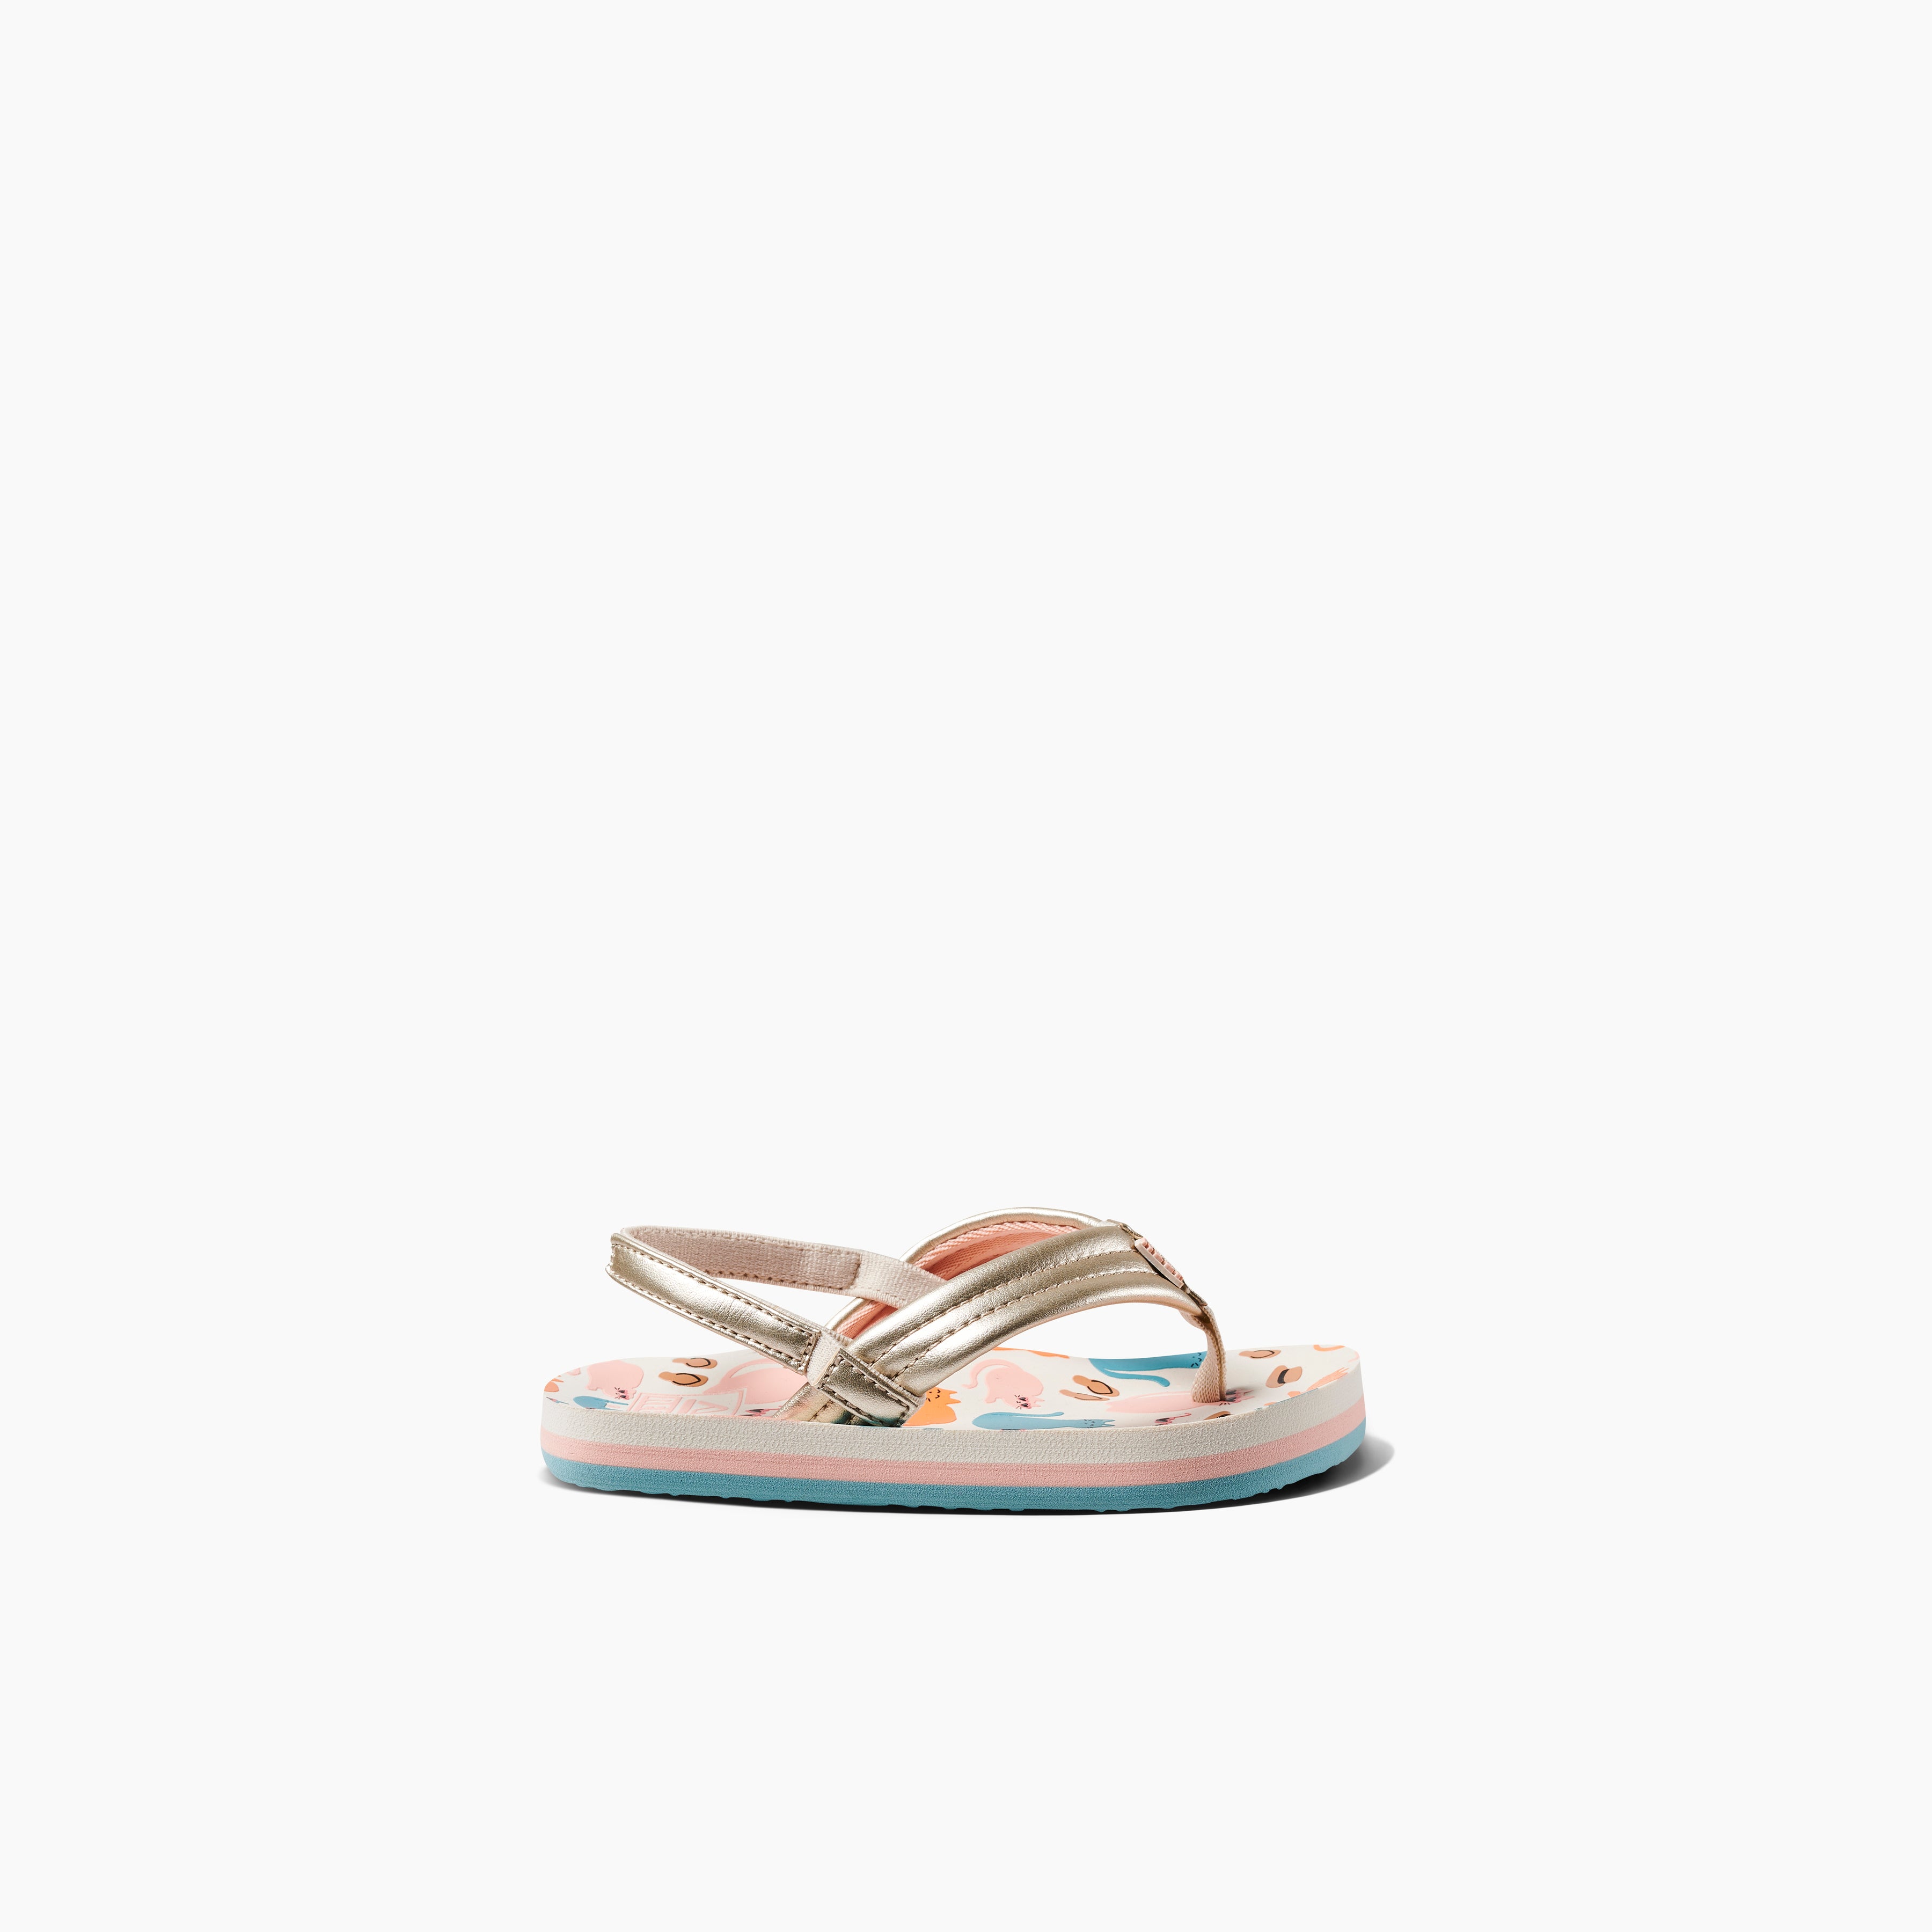 Toddler Girl's Ahi Sandals in Cool Cats side view